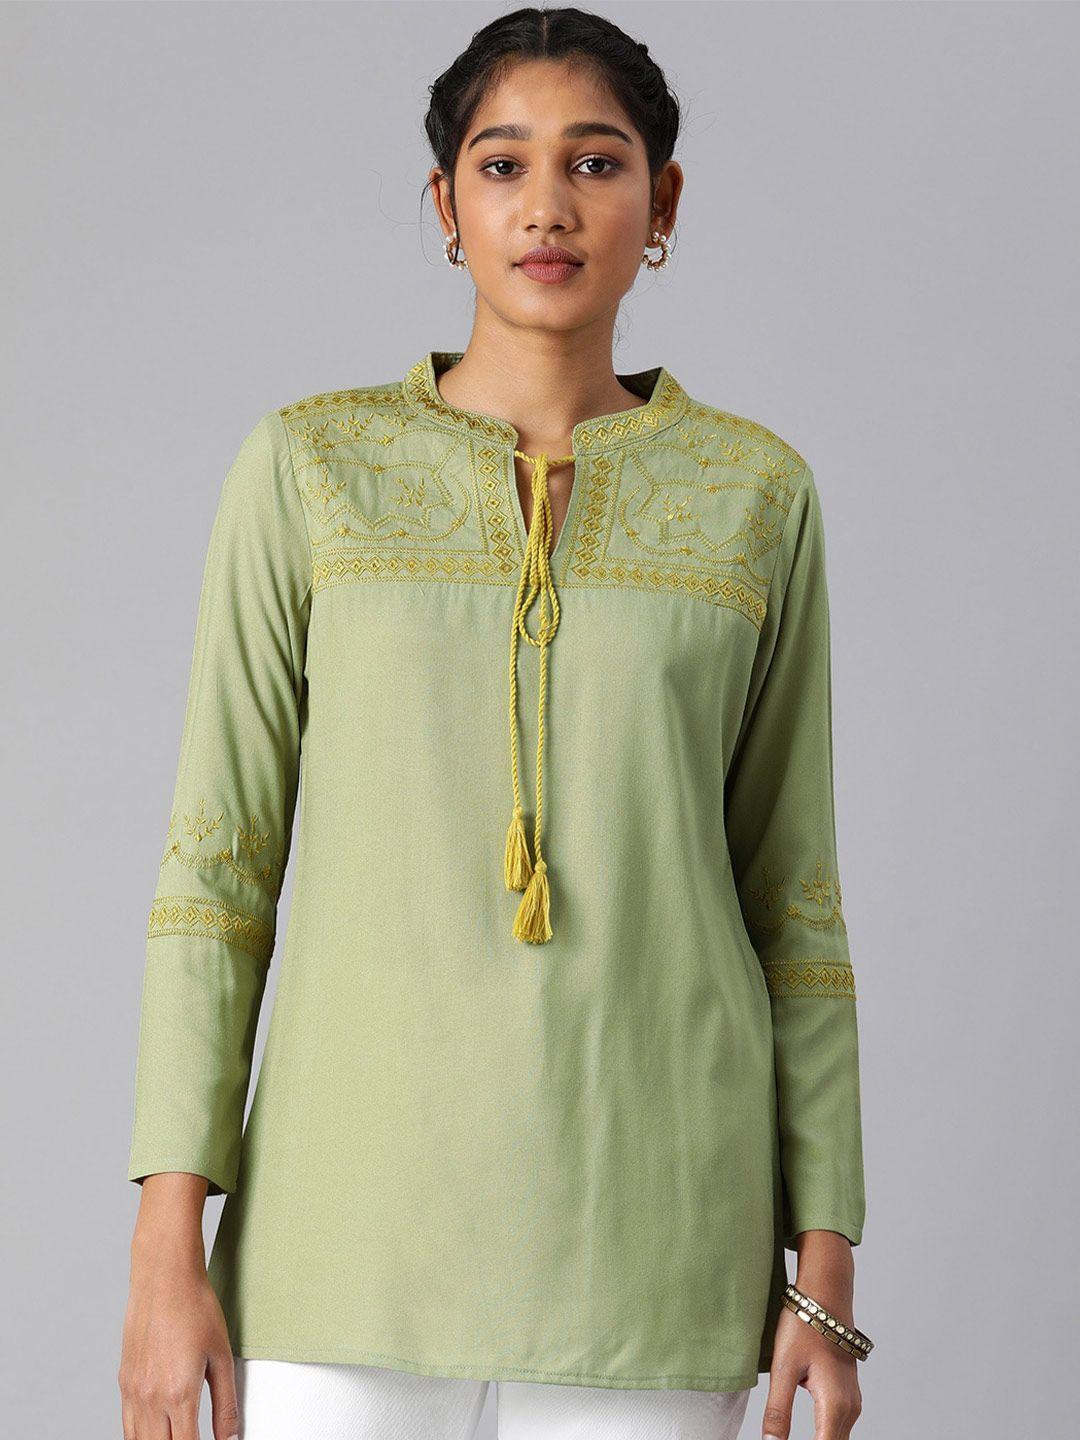 mast & harbour green embroidered tie-up neck long sleeves casual top